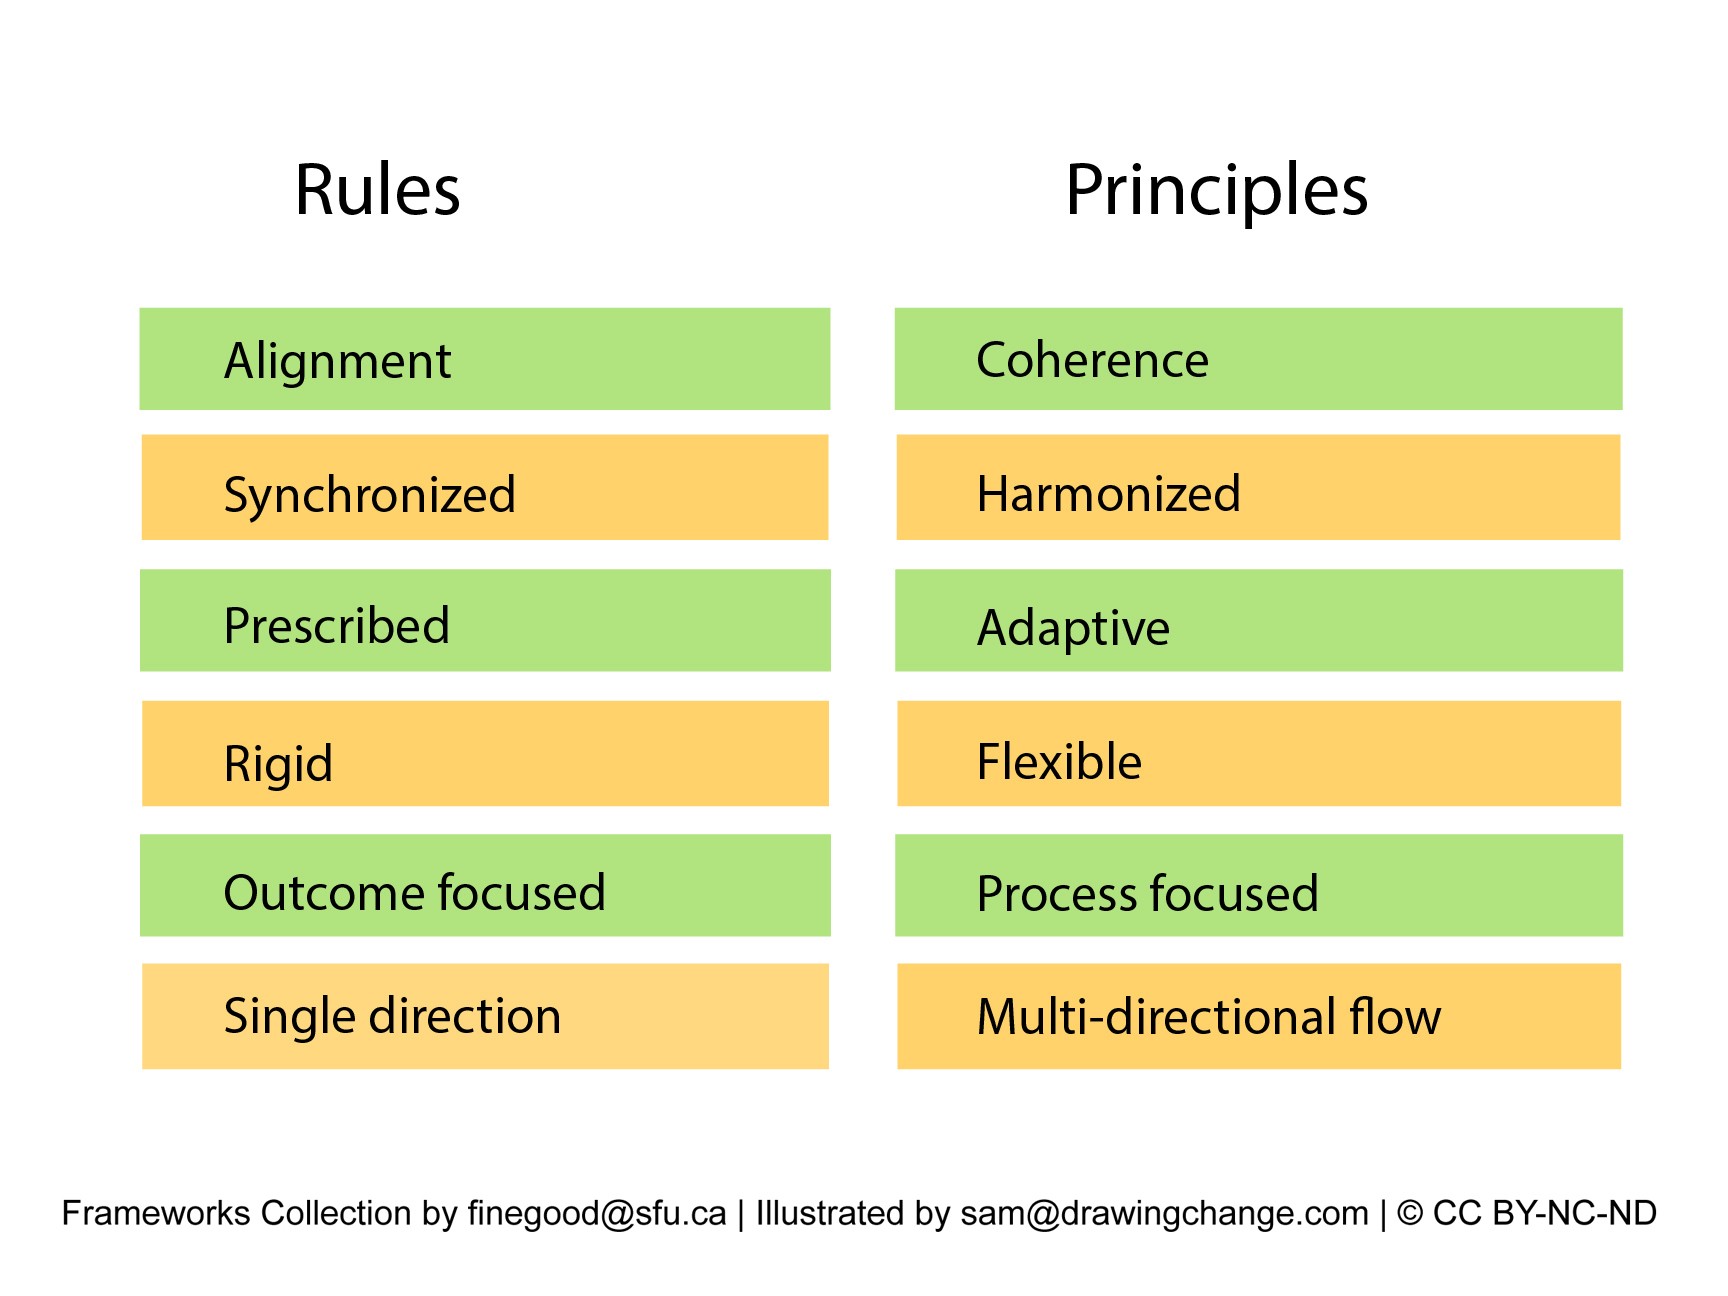 This image shows a comparison between "Rules" and "Principles", represented in a two-column table format.   On the left side, the column is labeled "Rules". The items in the "Rules" column, highlighted with green and yellow bars, are:  - Alignment - Synchronized - Prescribed - Rigid - Outcome focused - Single direction  On the right side, the column is labeled "Principles". The items in the "Principles" column are:  - Coherence - Harmonized - Adaptive - Flexible - Process focused - Multi-directional flow  The credit line at the bottom states: "Frameworks Collection by finegood@sfu.ca | Illustrated by sam@drawingchange.com | © CC BY-NC-ND".